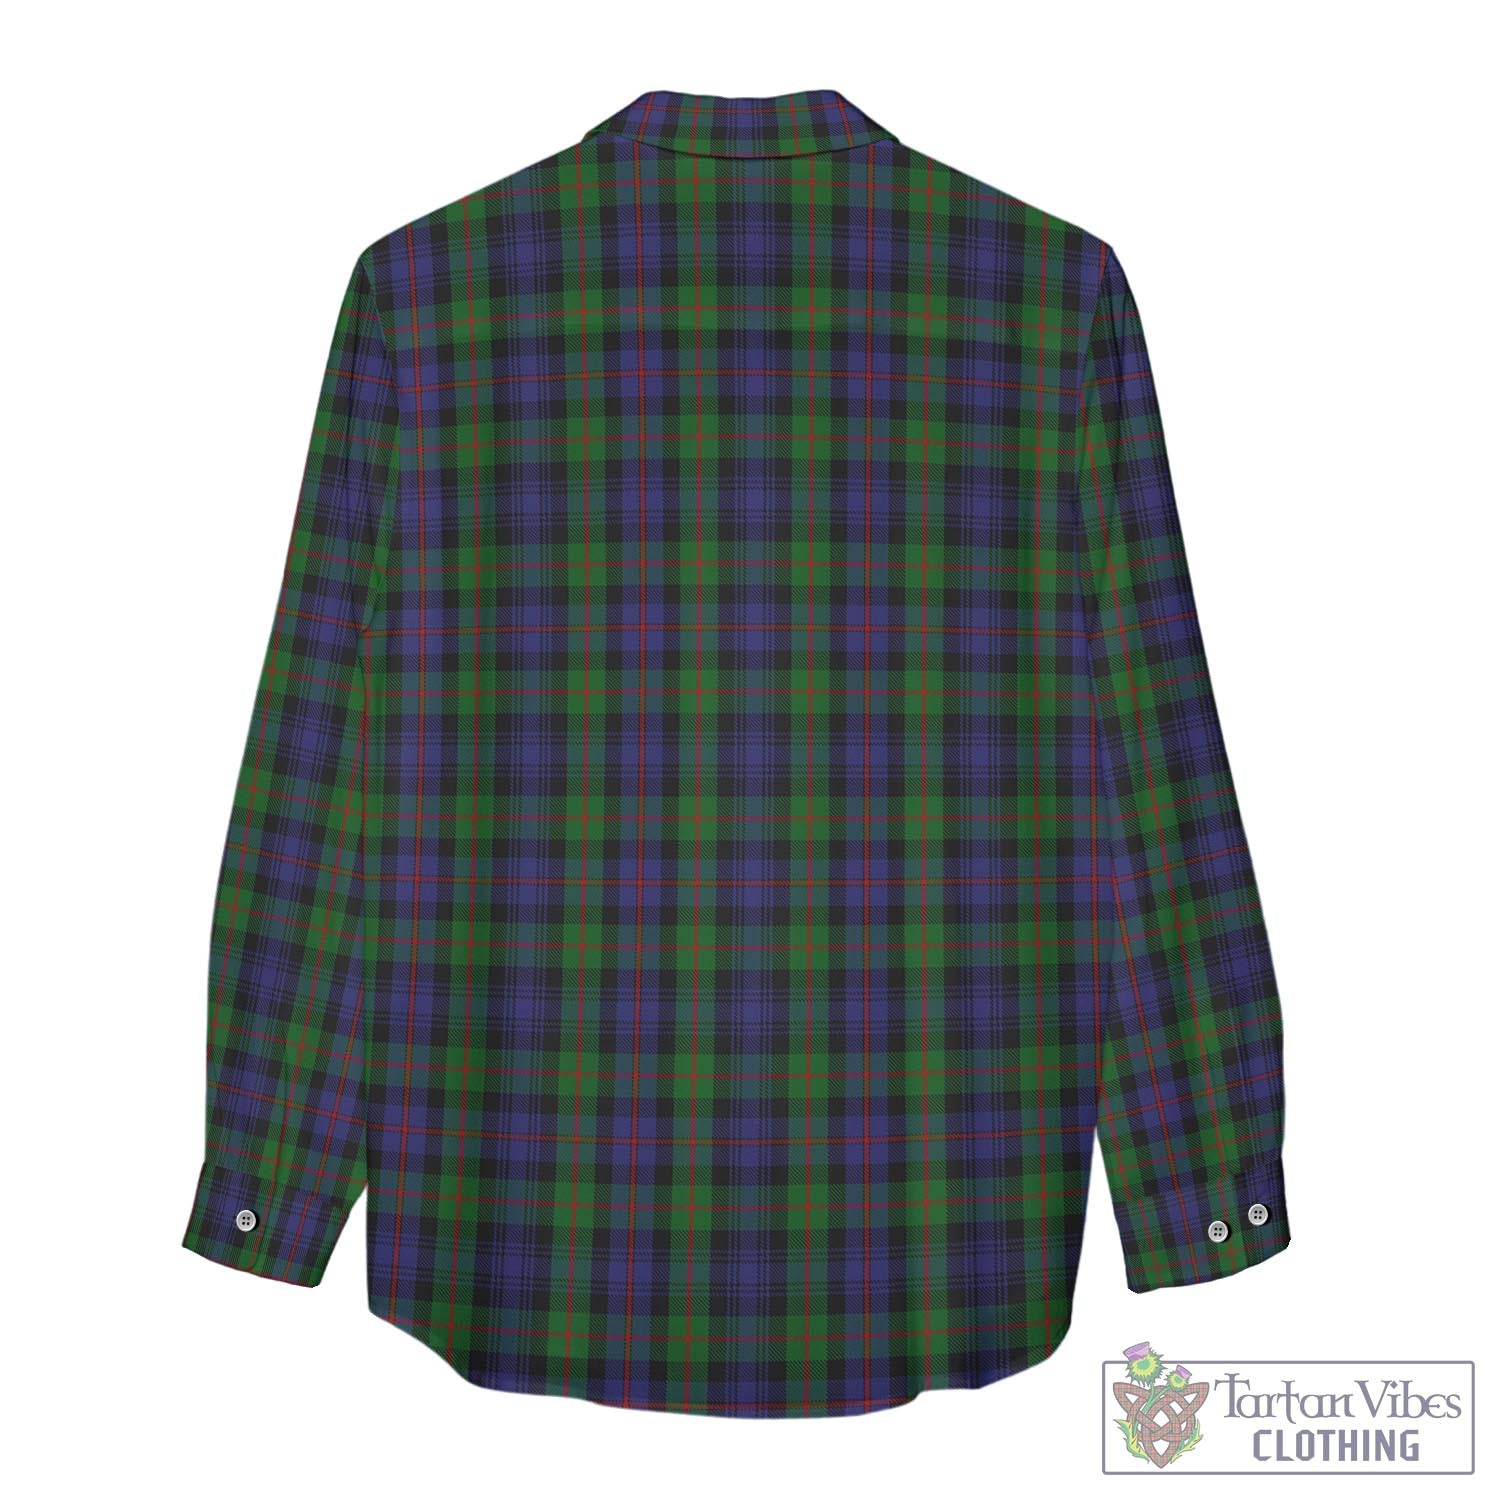 Tartan Vibes Clothing Murray of Atholl Tartan Womens Casual Shirt with Family Crest